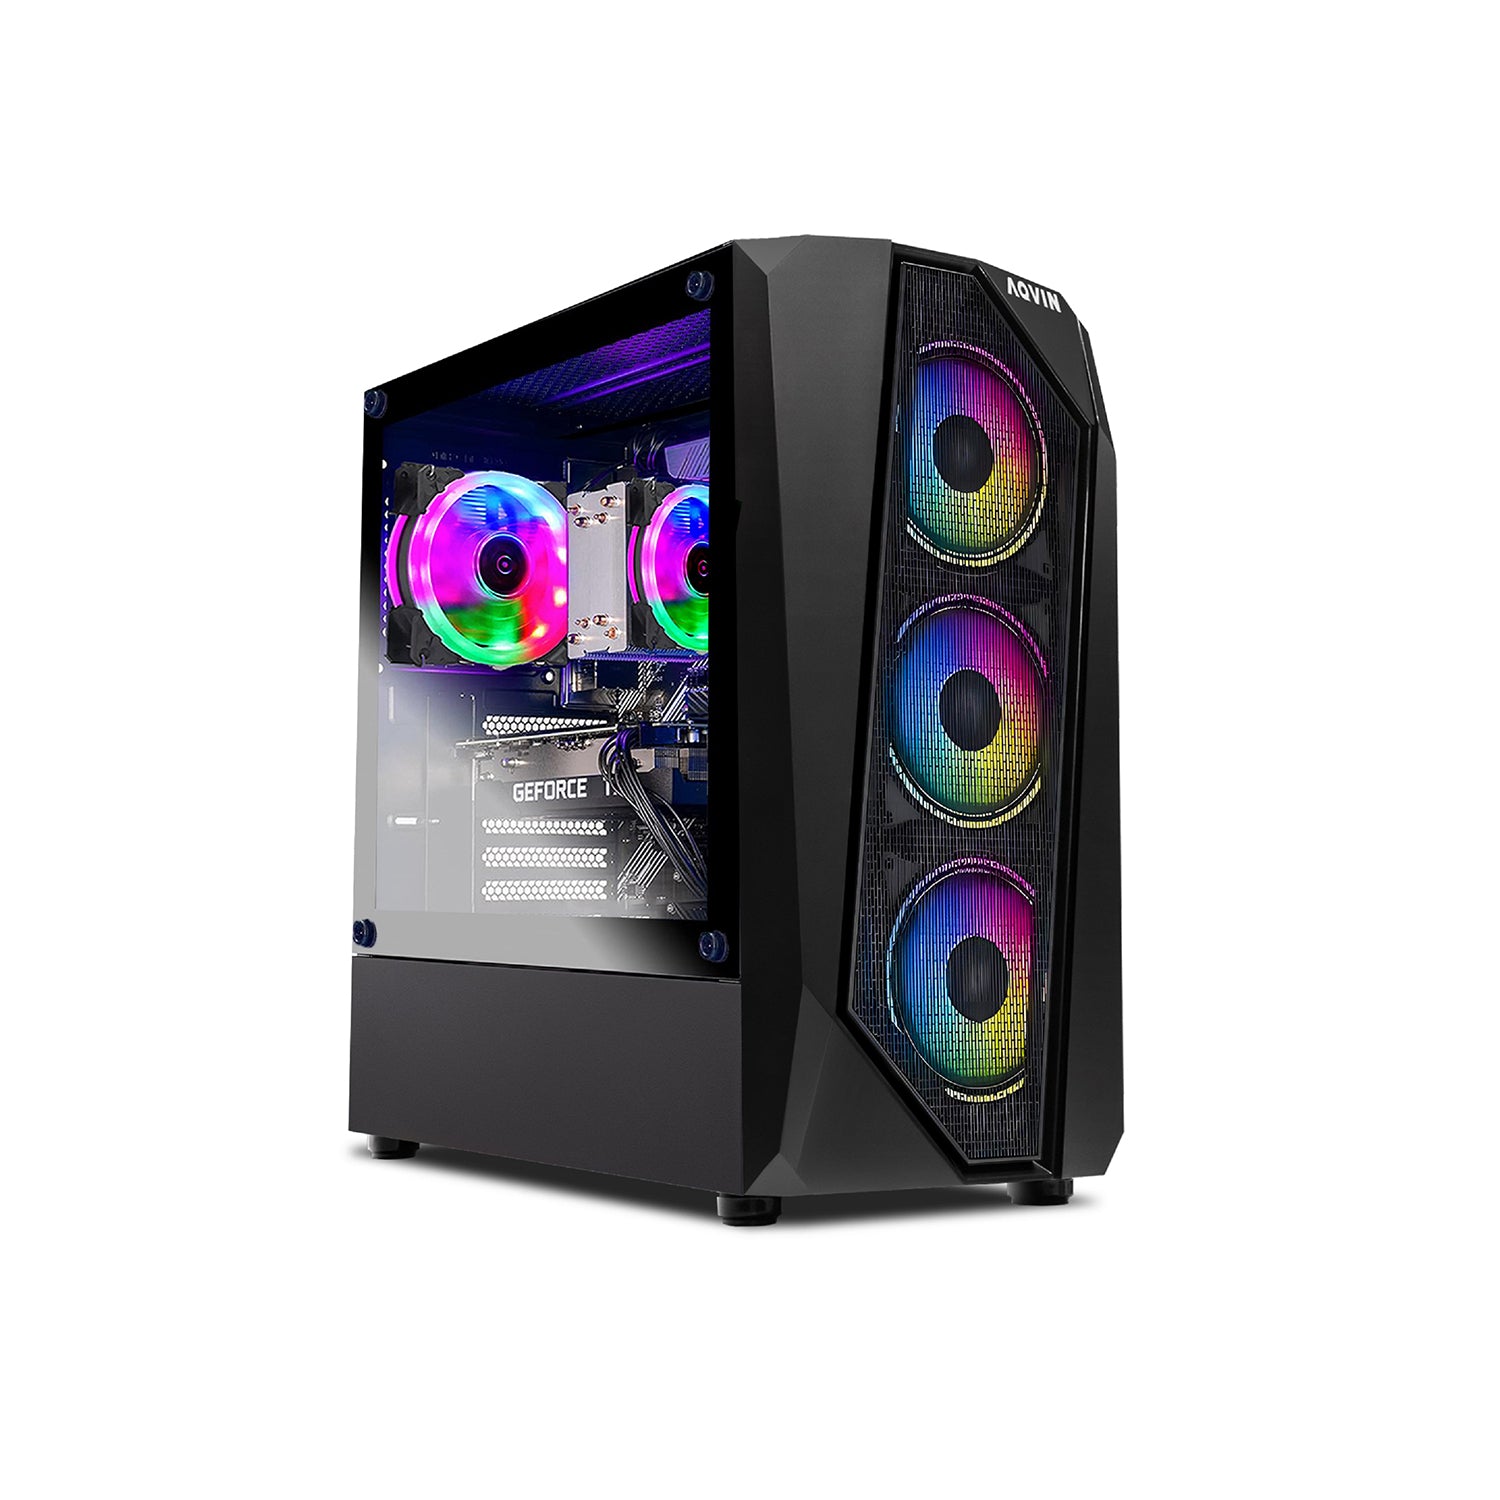 AQVIN AQ30 Series Gaming PC | Ray Tracing NVIDIA and AMD Graphics Card | Intel Core i7 - 6th/ 8th Gen CPU | 32GB RAM DDR4 | 1TB - 2TB SSD Storage | Windows 10/11 Pro | Gaming Keyboard Mouse